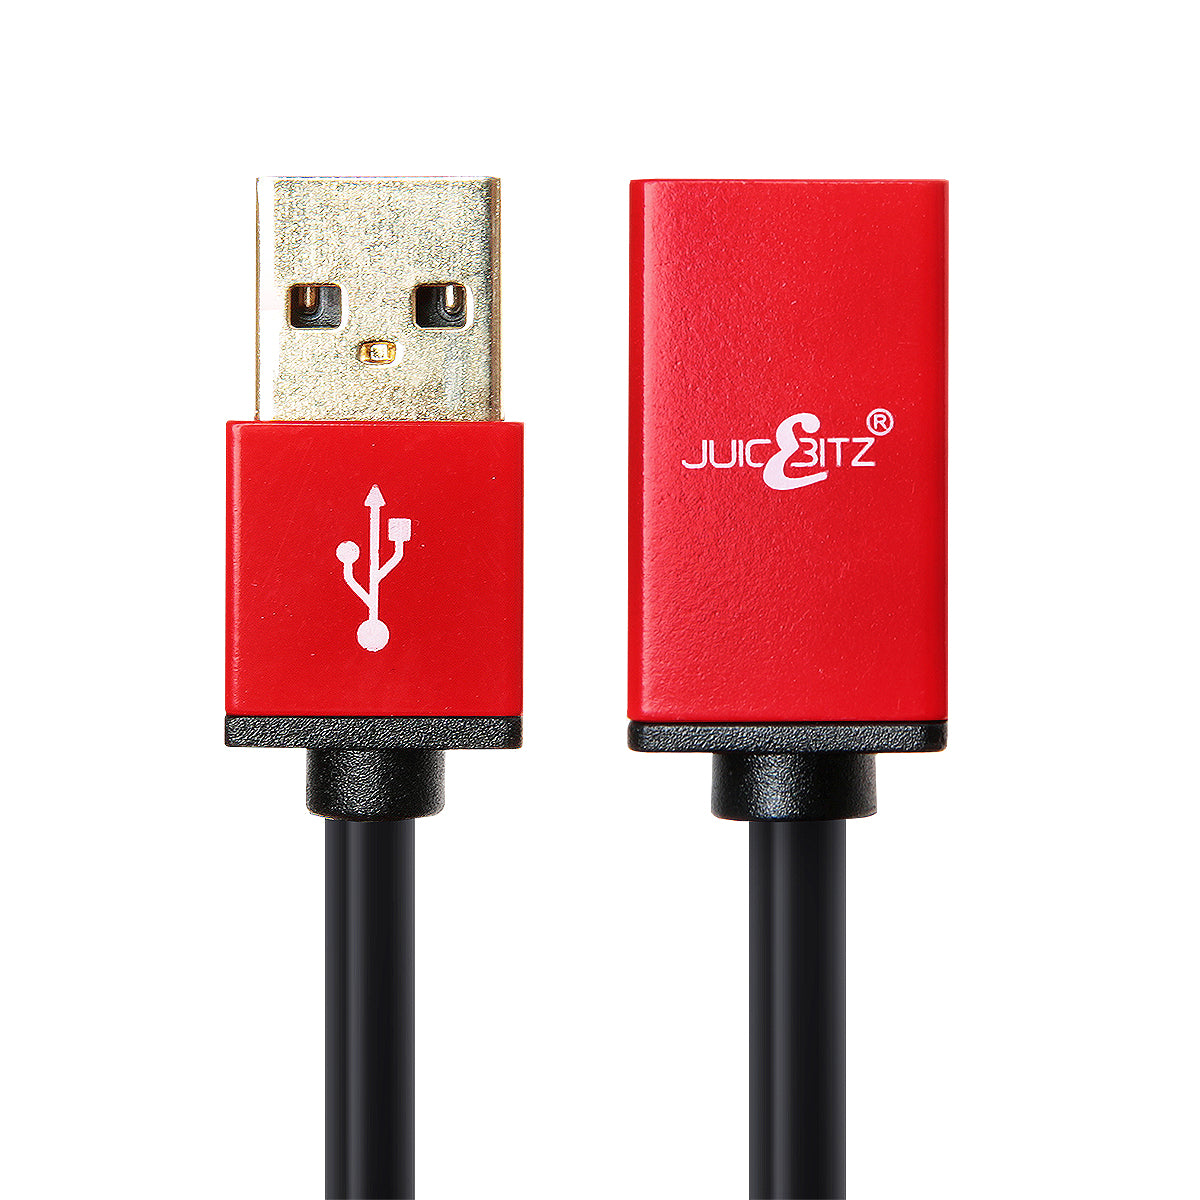 Premium USB 2.0 Male to Female High Speed 480Mbps Extension Cable